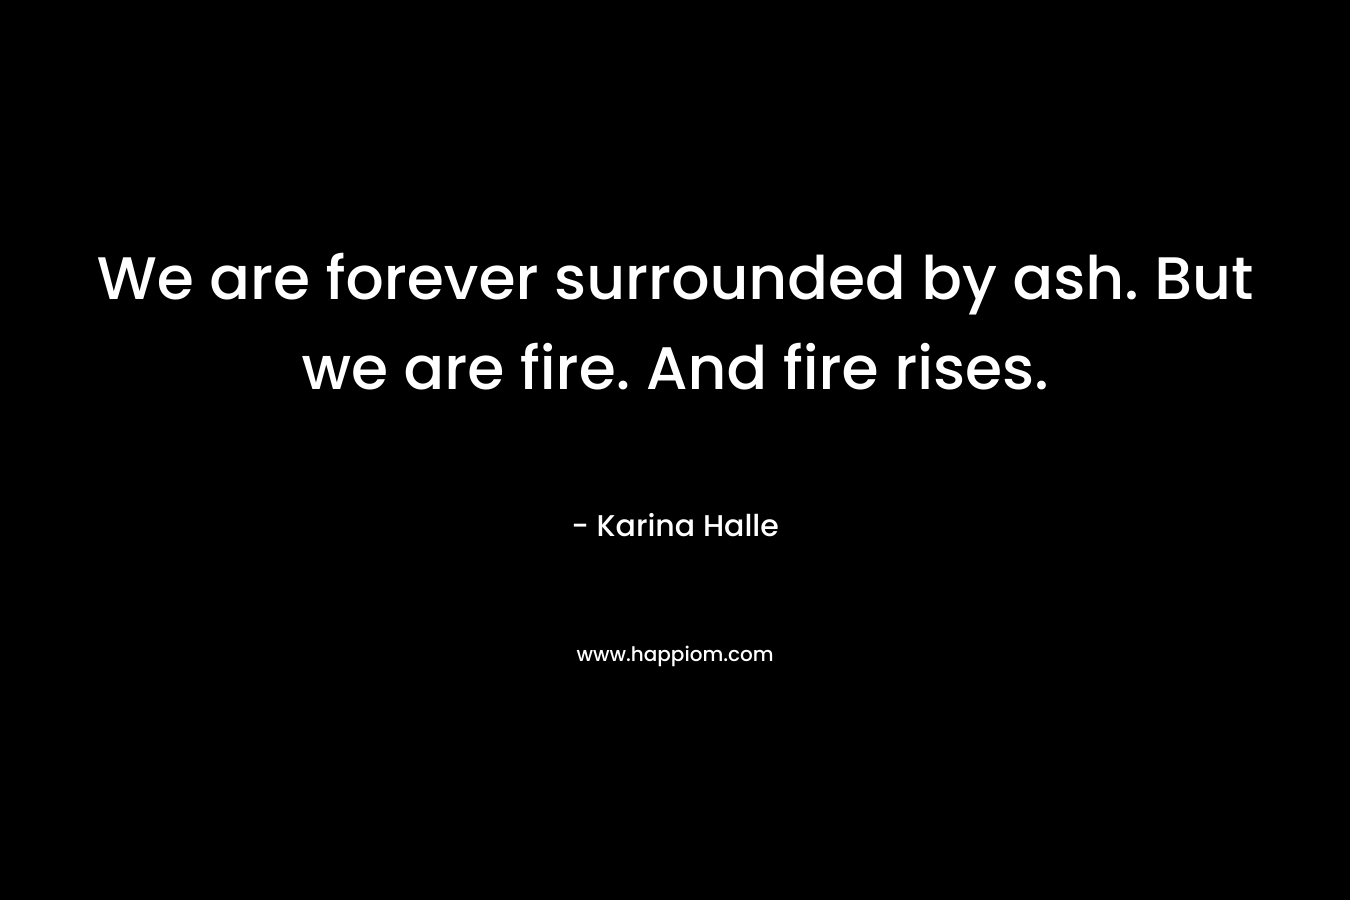 We are forever surrounded by ash. But we are fire. And fire rises. – Karina Halle